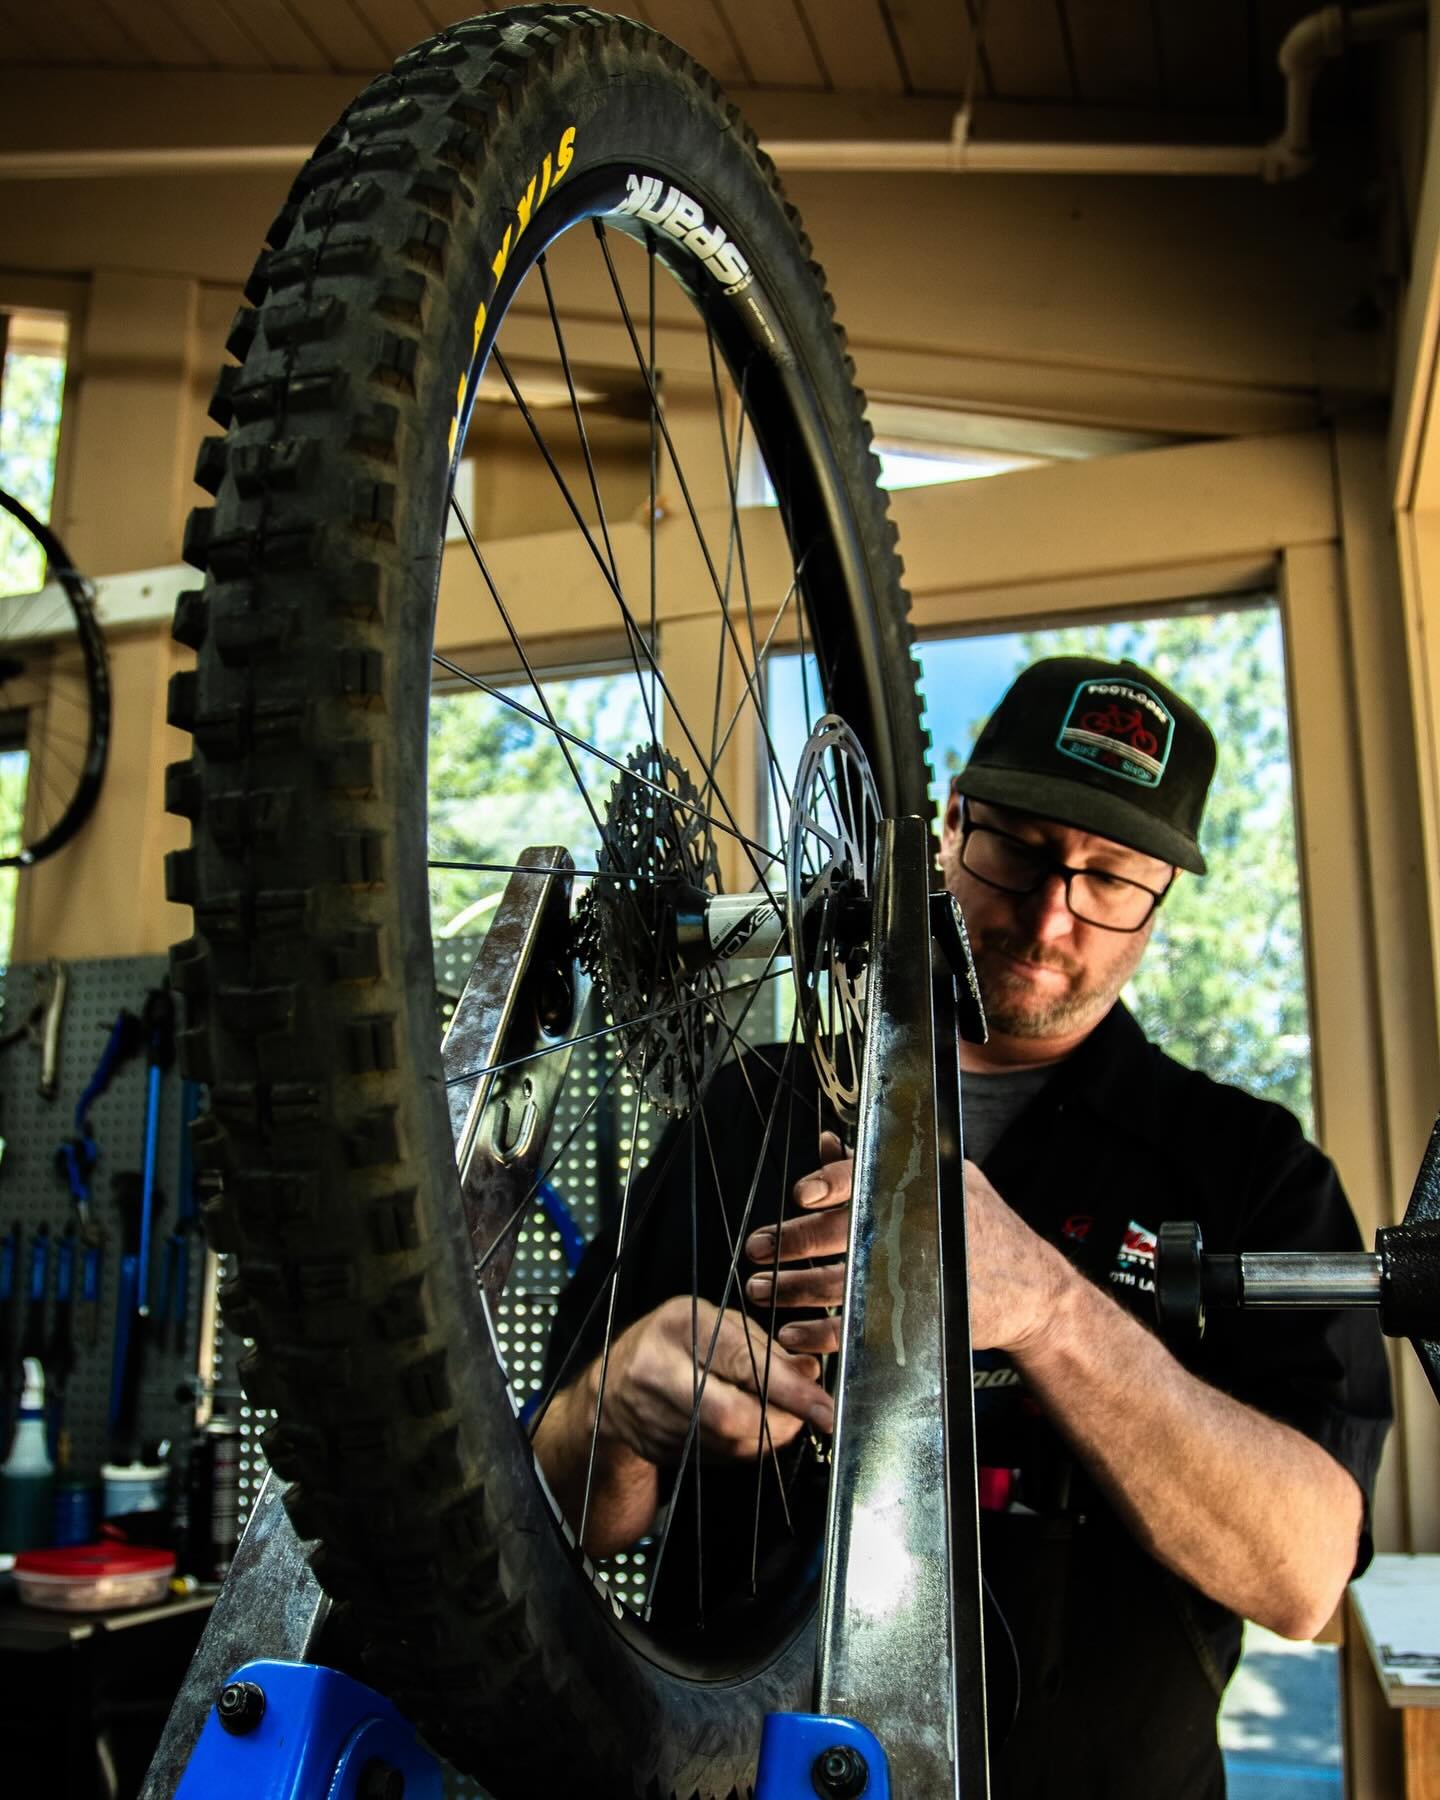 It&rsquo;s about dang time! Bike Repair Shop is now Open . Time to true those wheels, Lube the chains, fine tune your derailleur, bleed your brakes... The first few weeks will be busy but we are ready! Let&rsquo;s go ride some bikes! 🚵